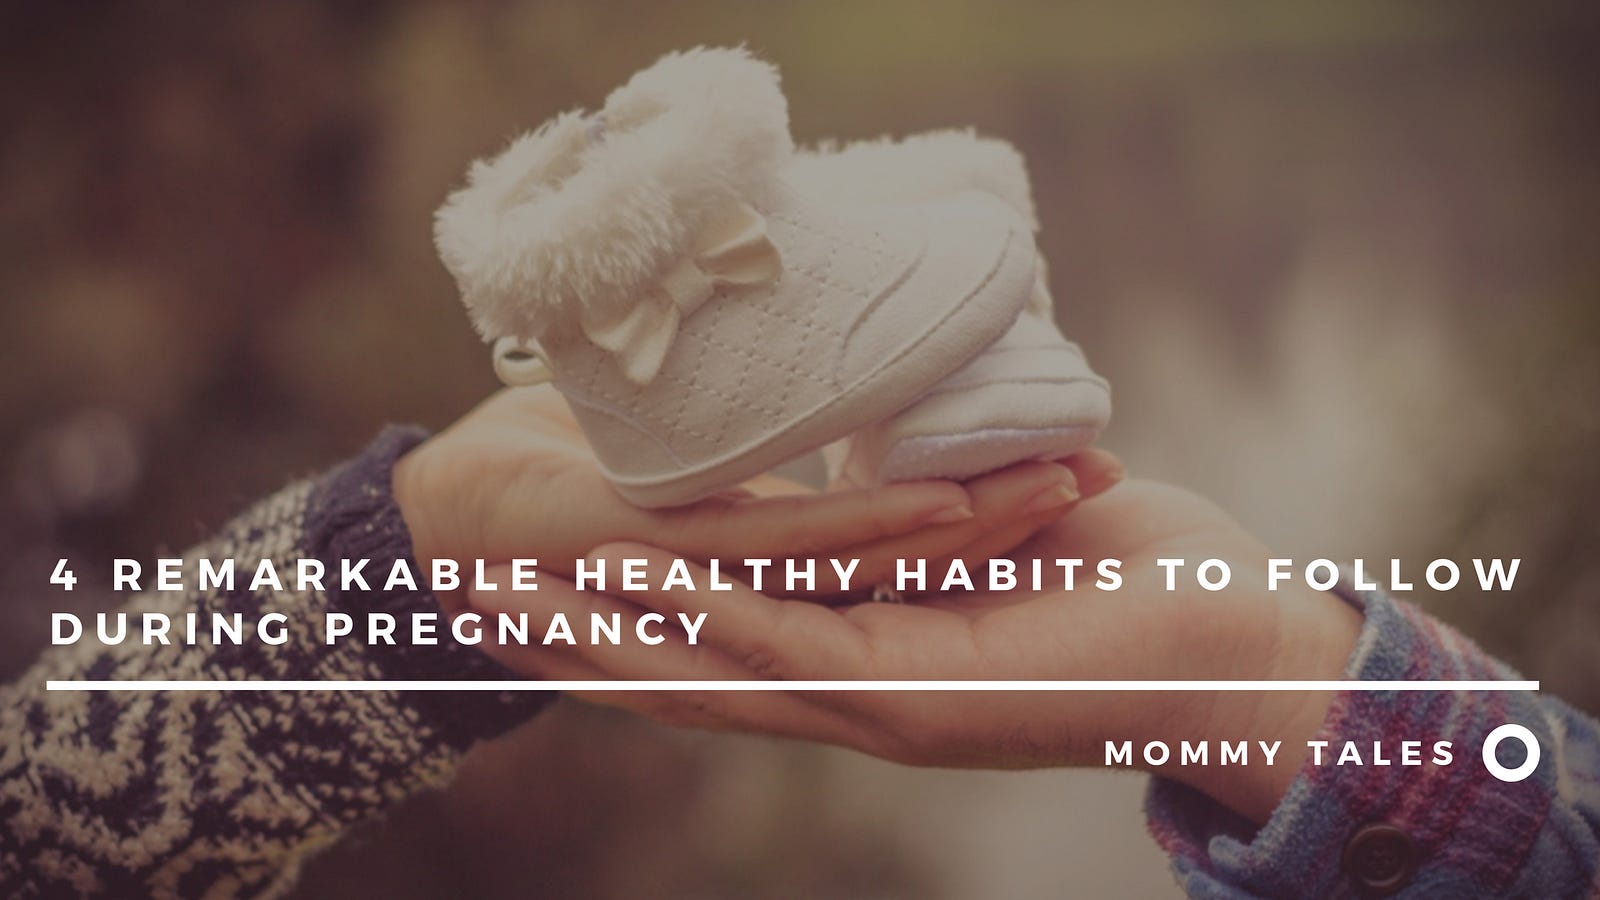 4 Remarkable Healthy Habits to Follow During Pregnancy